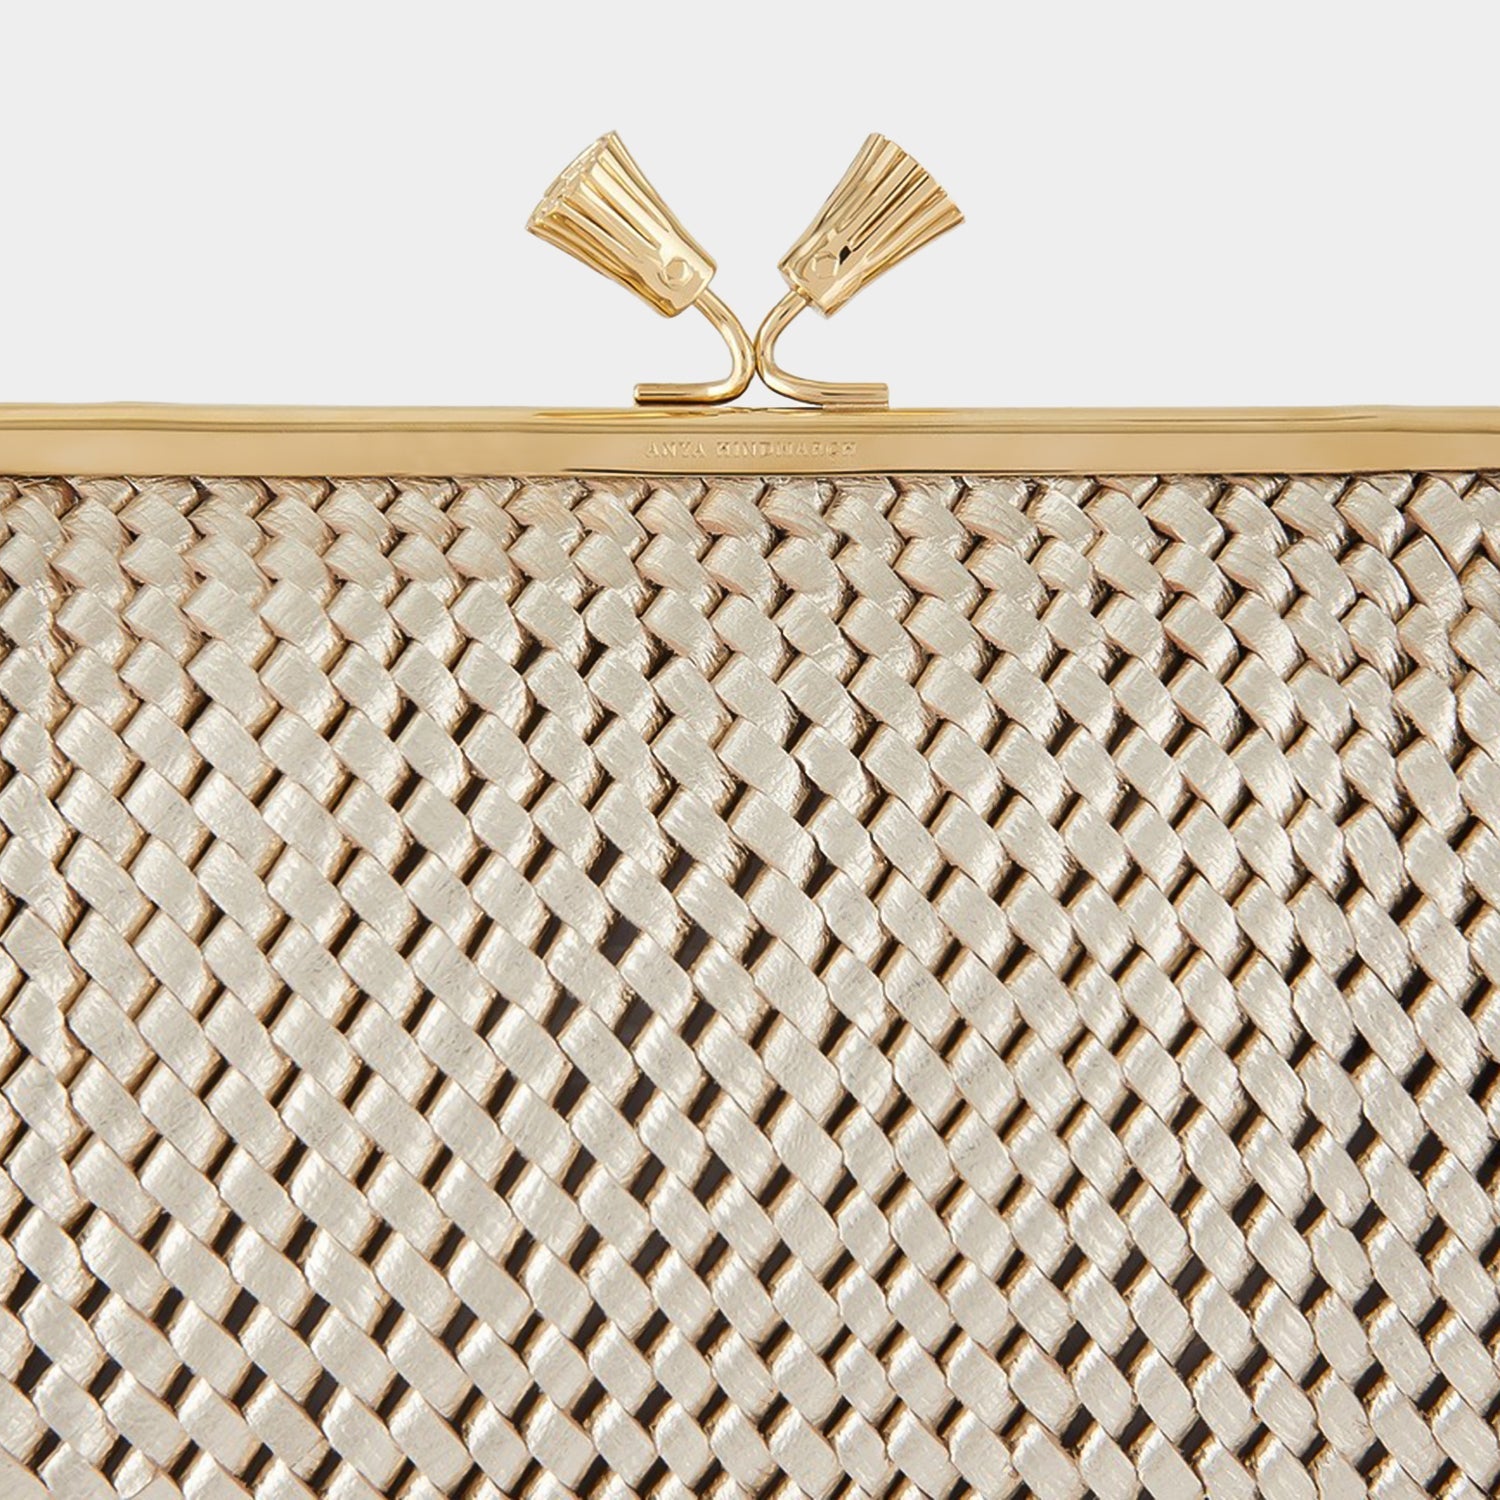 Large Maud Plaited Clutch -

                  
                    Capra Leather in Light Gold -
                  

                  Anya Hindmarch EU
